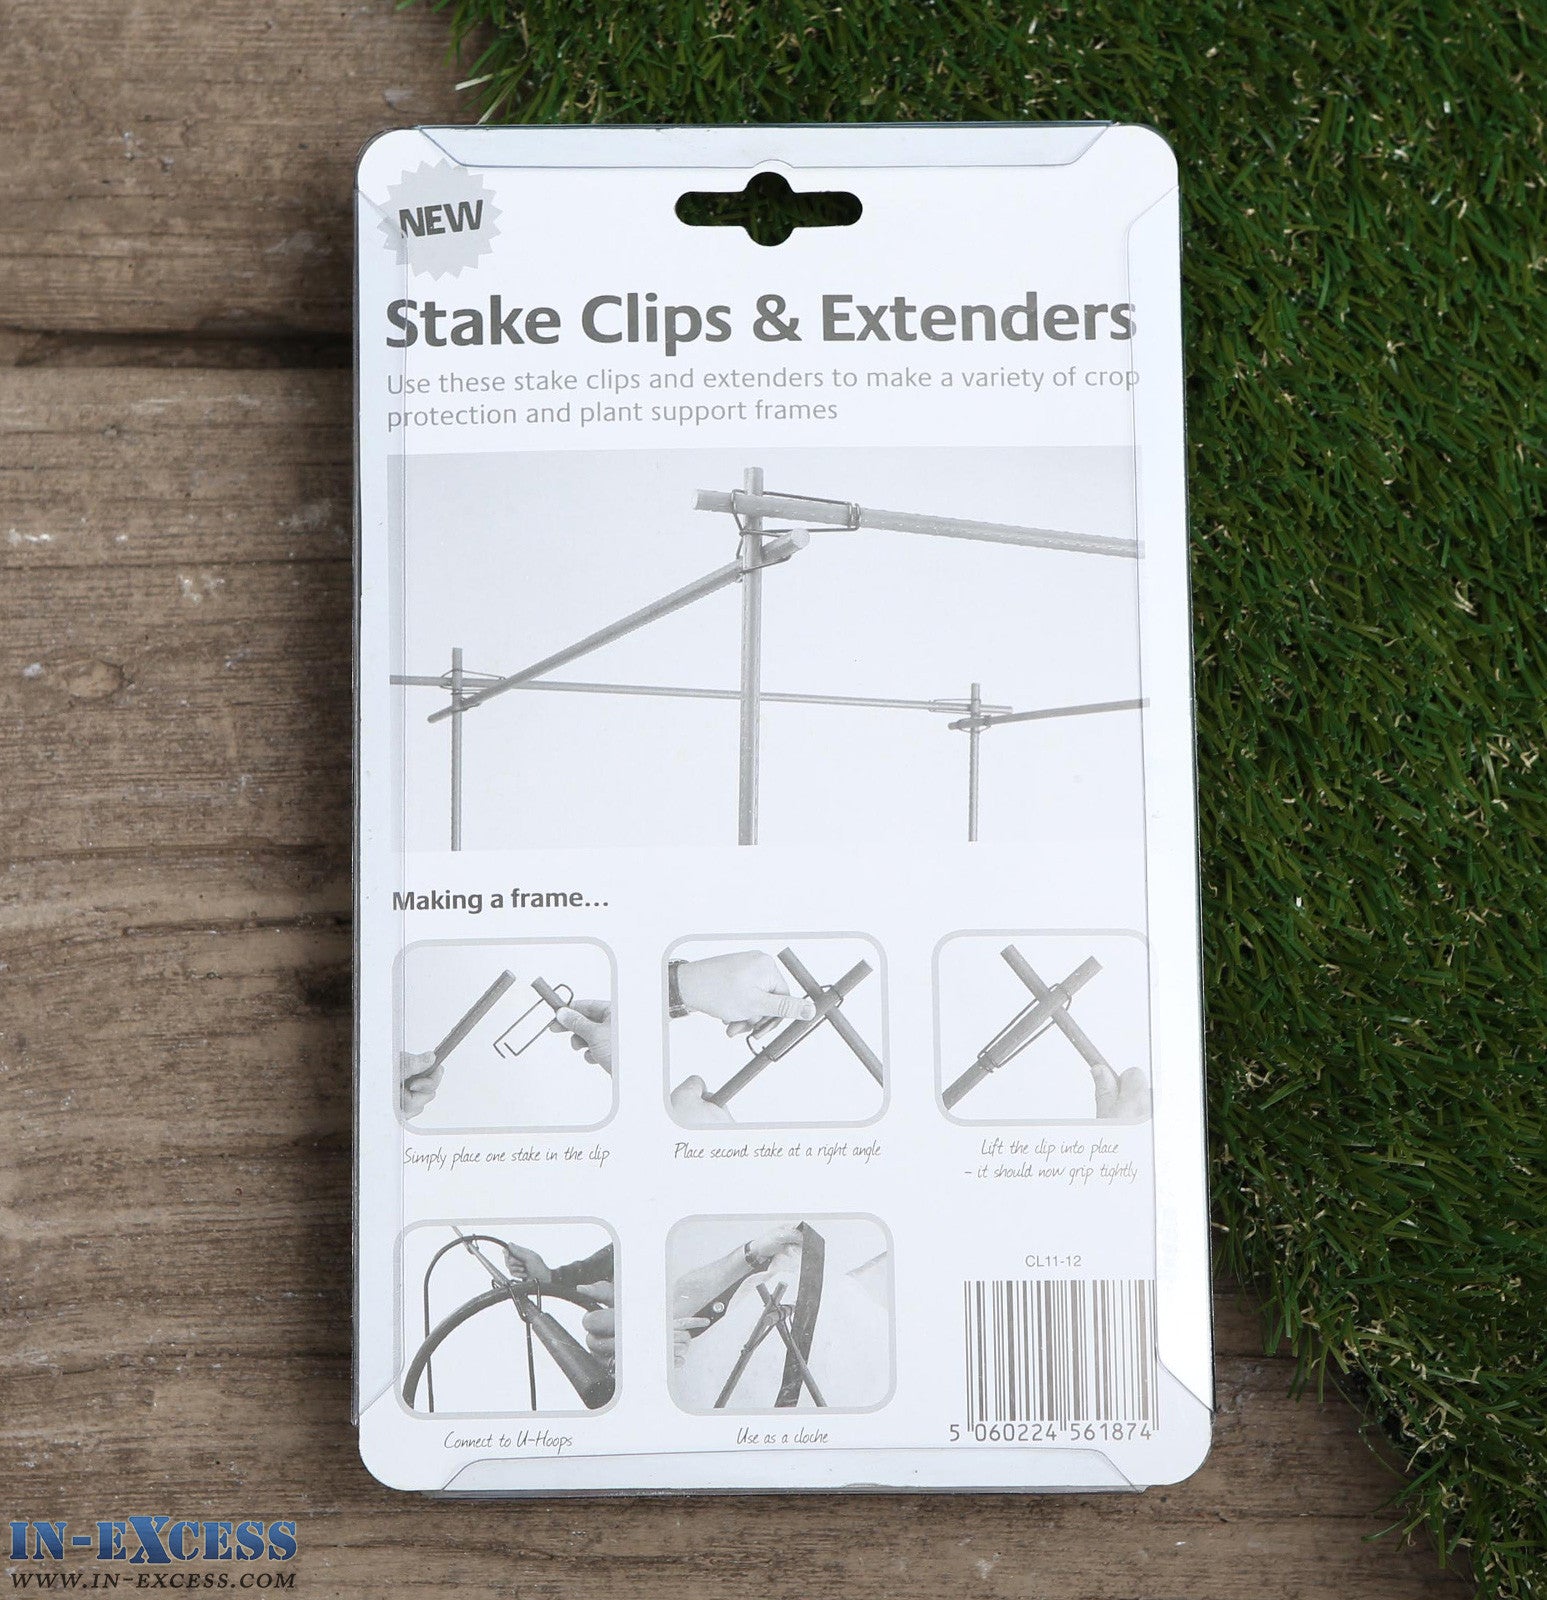 Green Tree Stake Clips & Extenders 11mm (12 clips & 4 extenders)